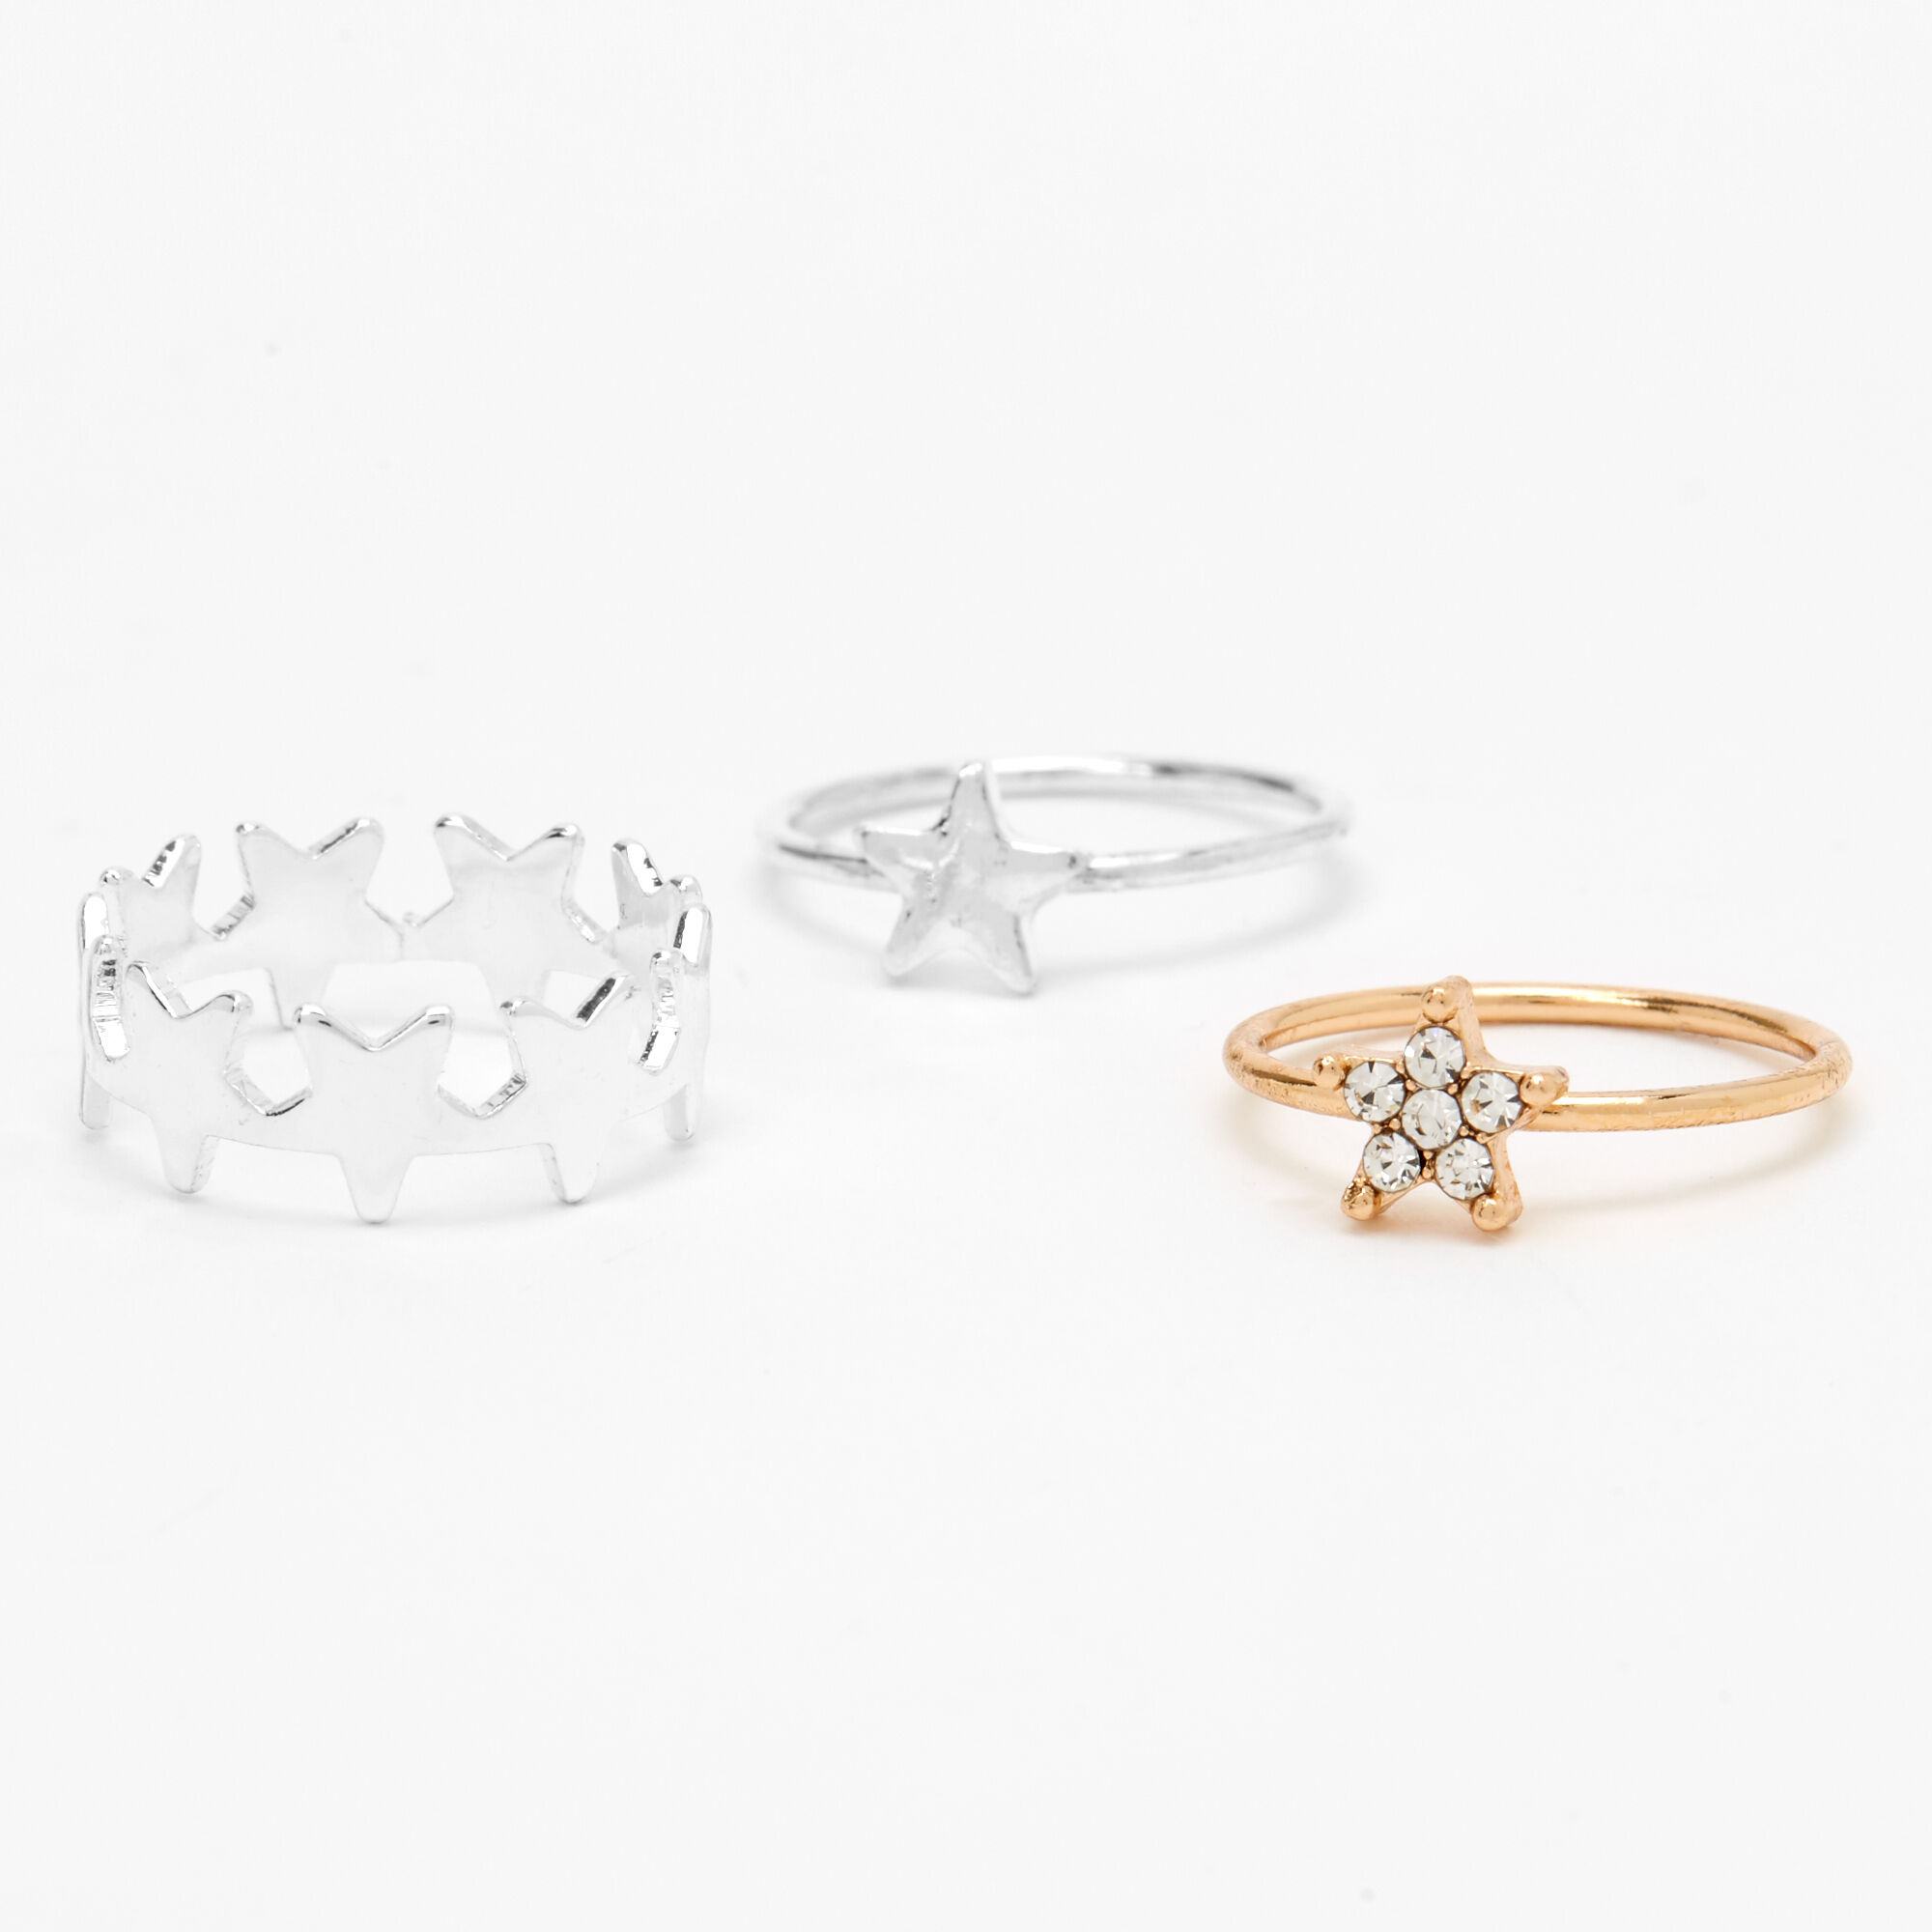 Make Head-turning Statements With Quirky Midi Rings on Your D-Day